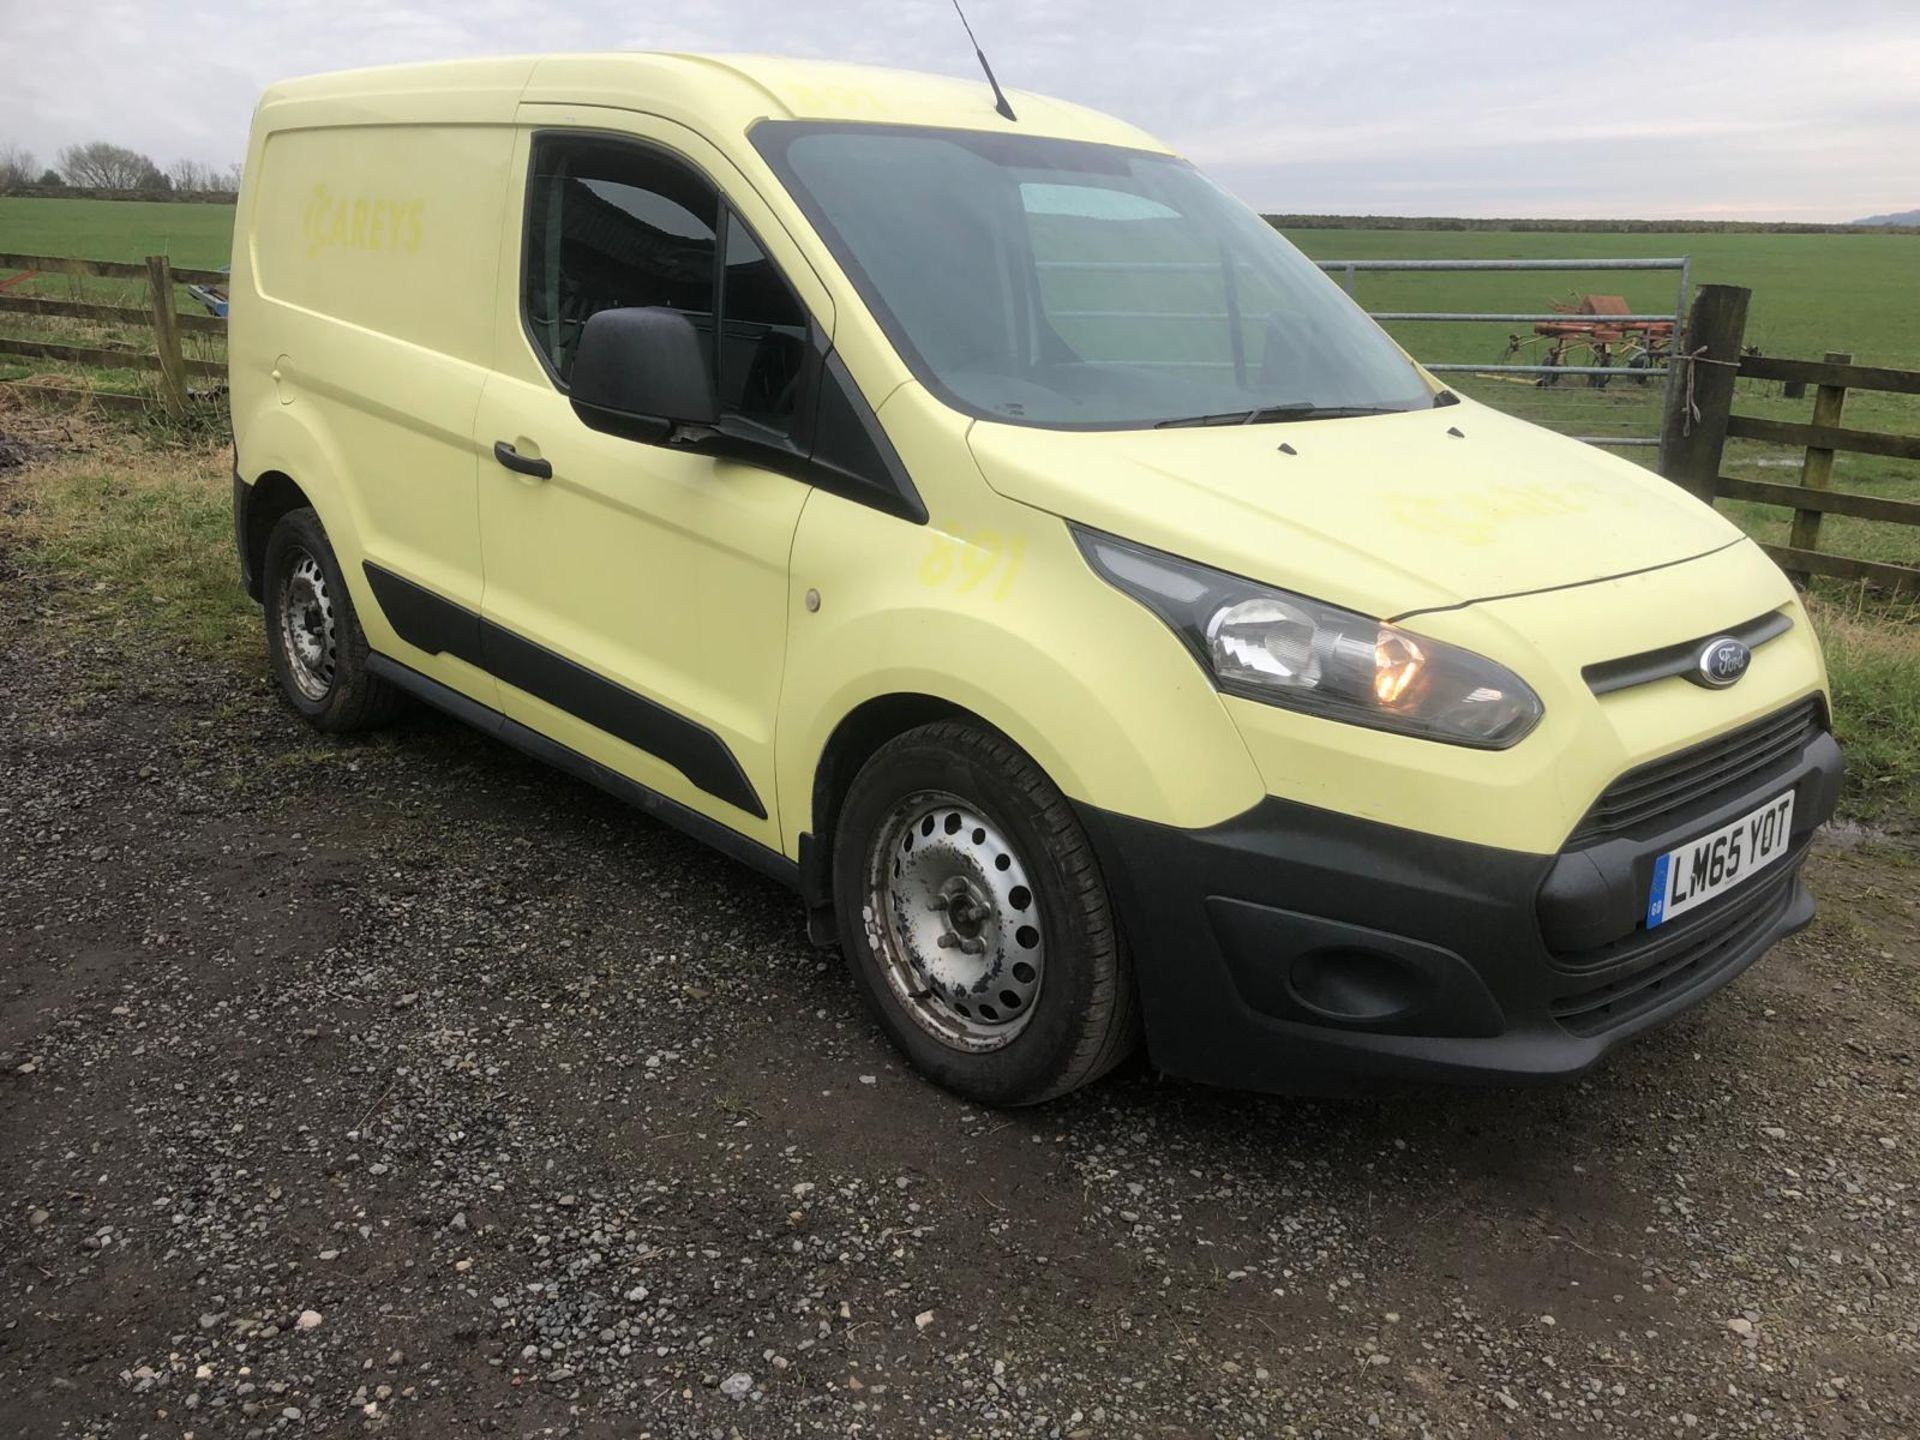 2015 FORD TRANSIT CONNECT 200 PANEL VAN - 1.6 TDCI - 91621 MILES - Image 12 of 15